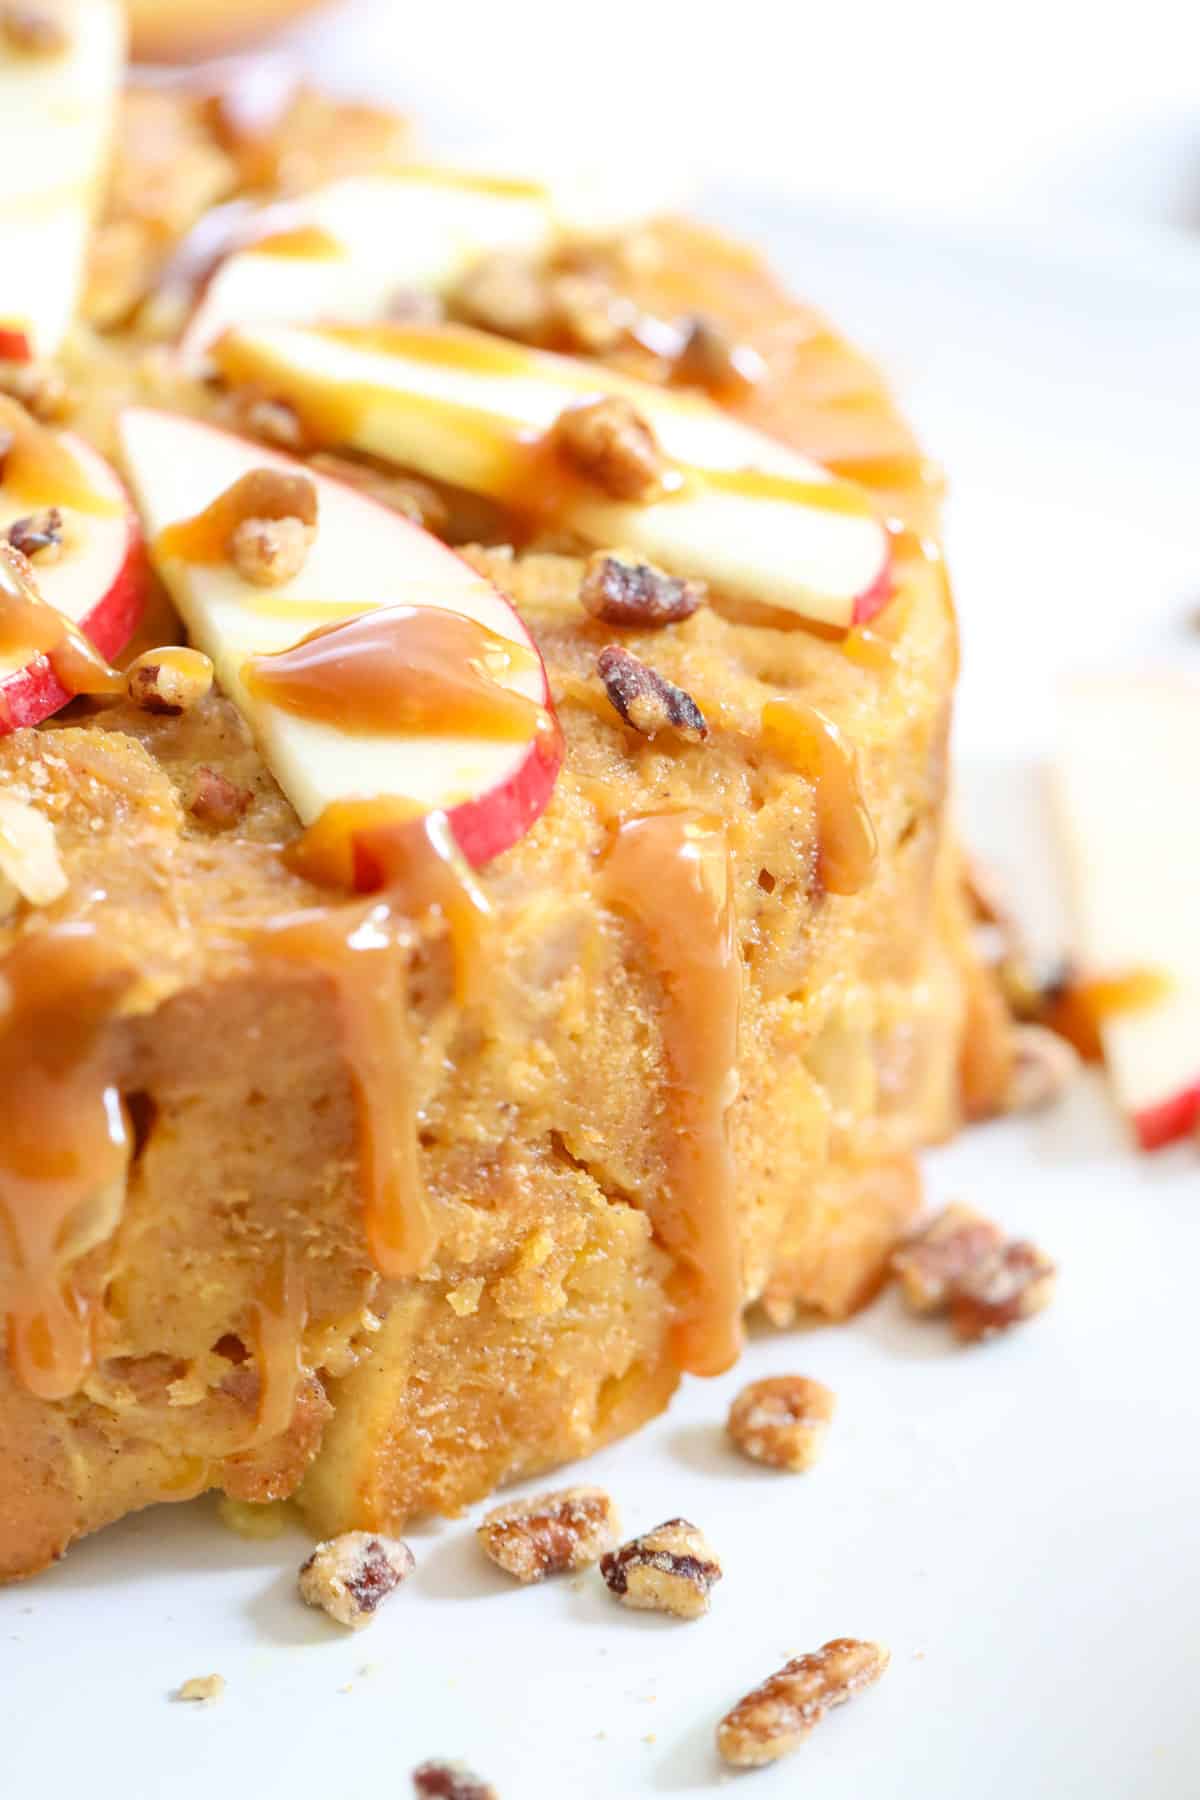 caramel sauce dripping down the side of apple bread pudding